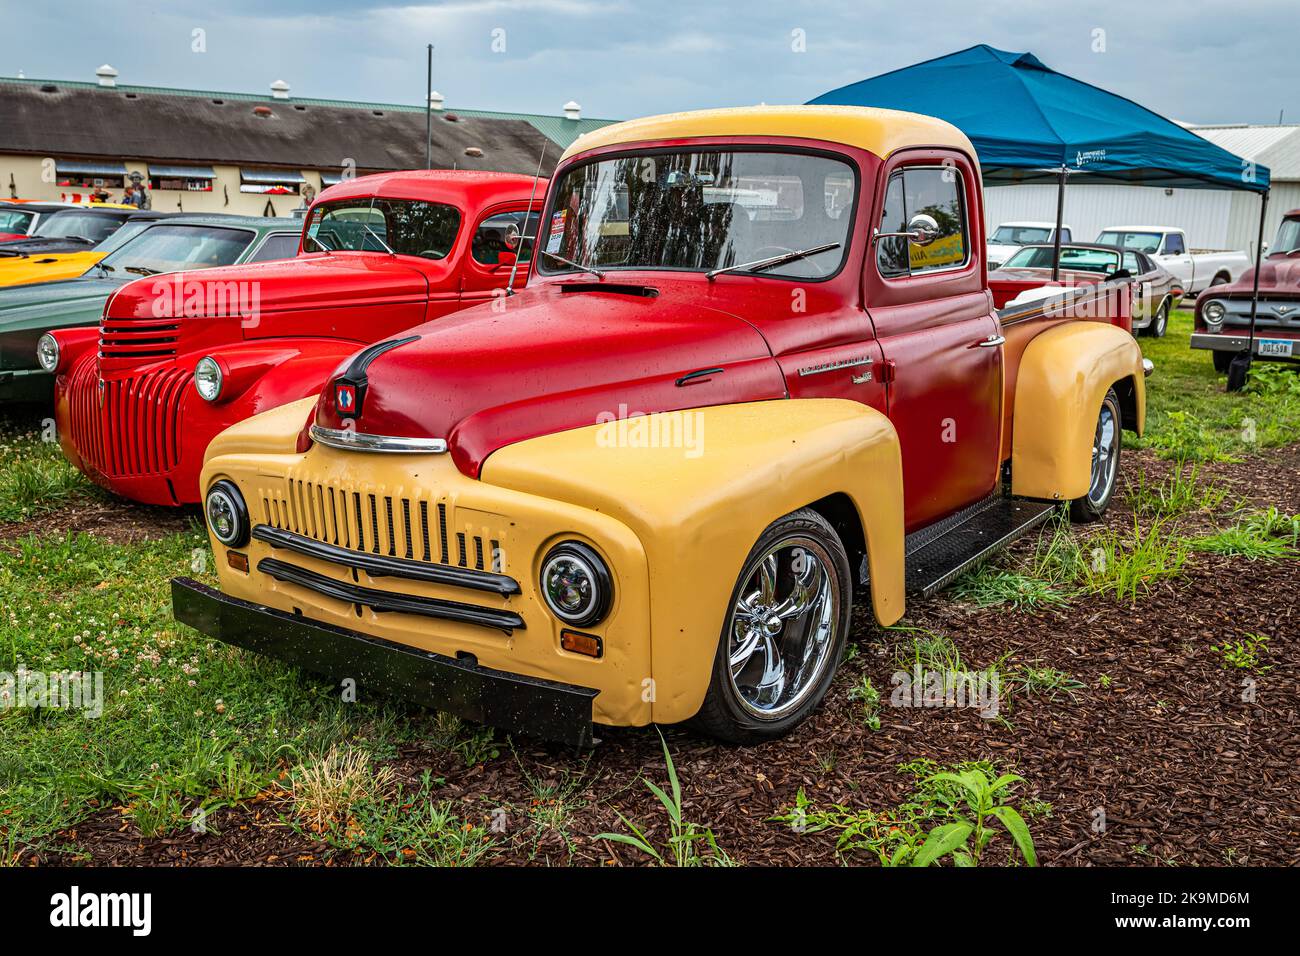 Des Moines, IA - July 01, 2022: High perspective front corner view of a 1952 International Harvester L110 Pickup Truck at a local car show. Stock Photo